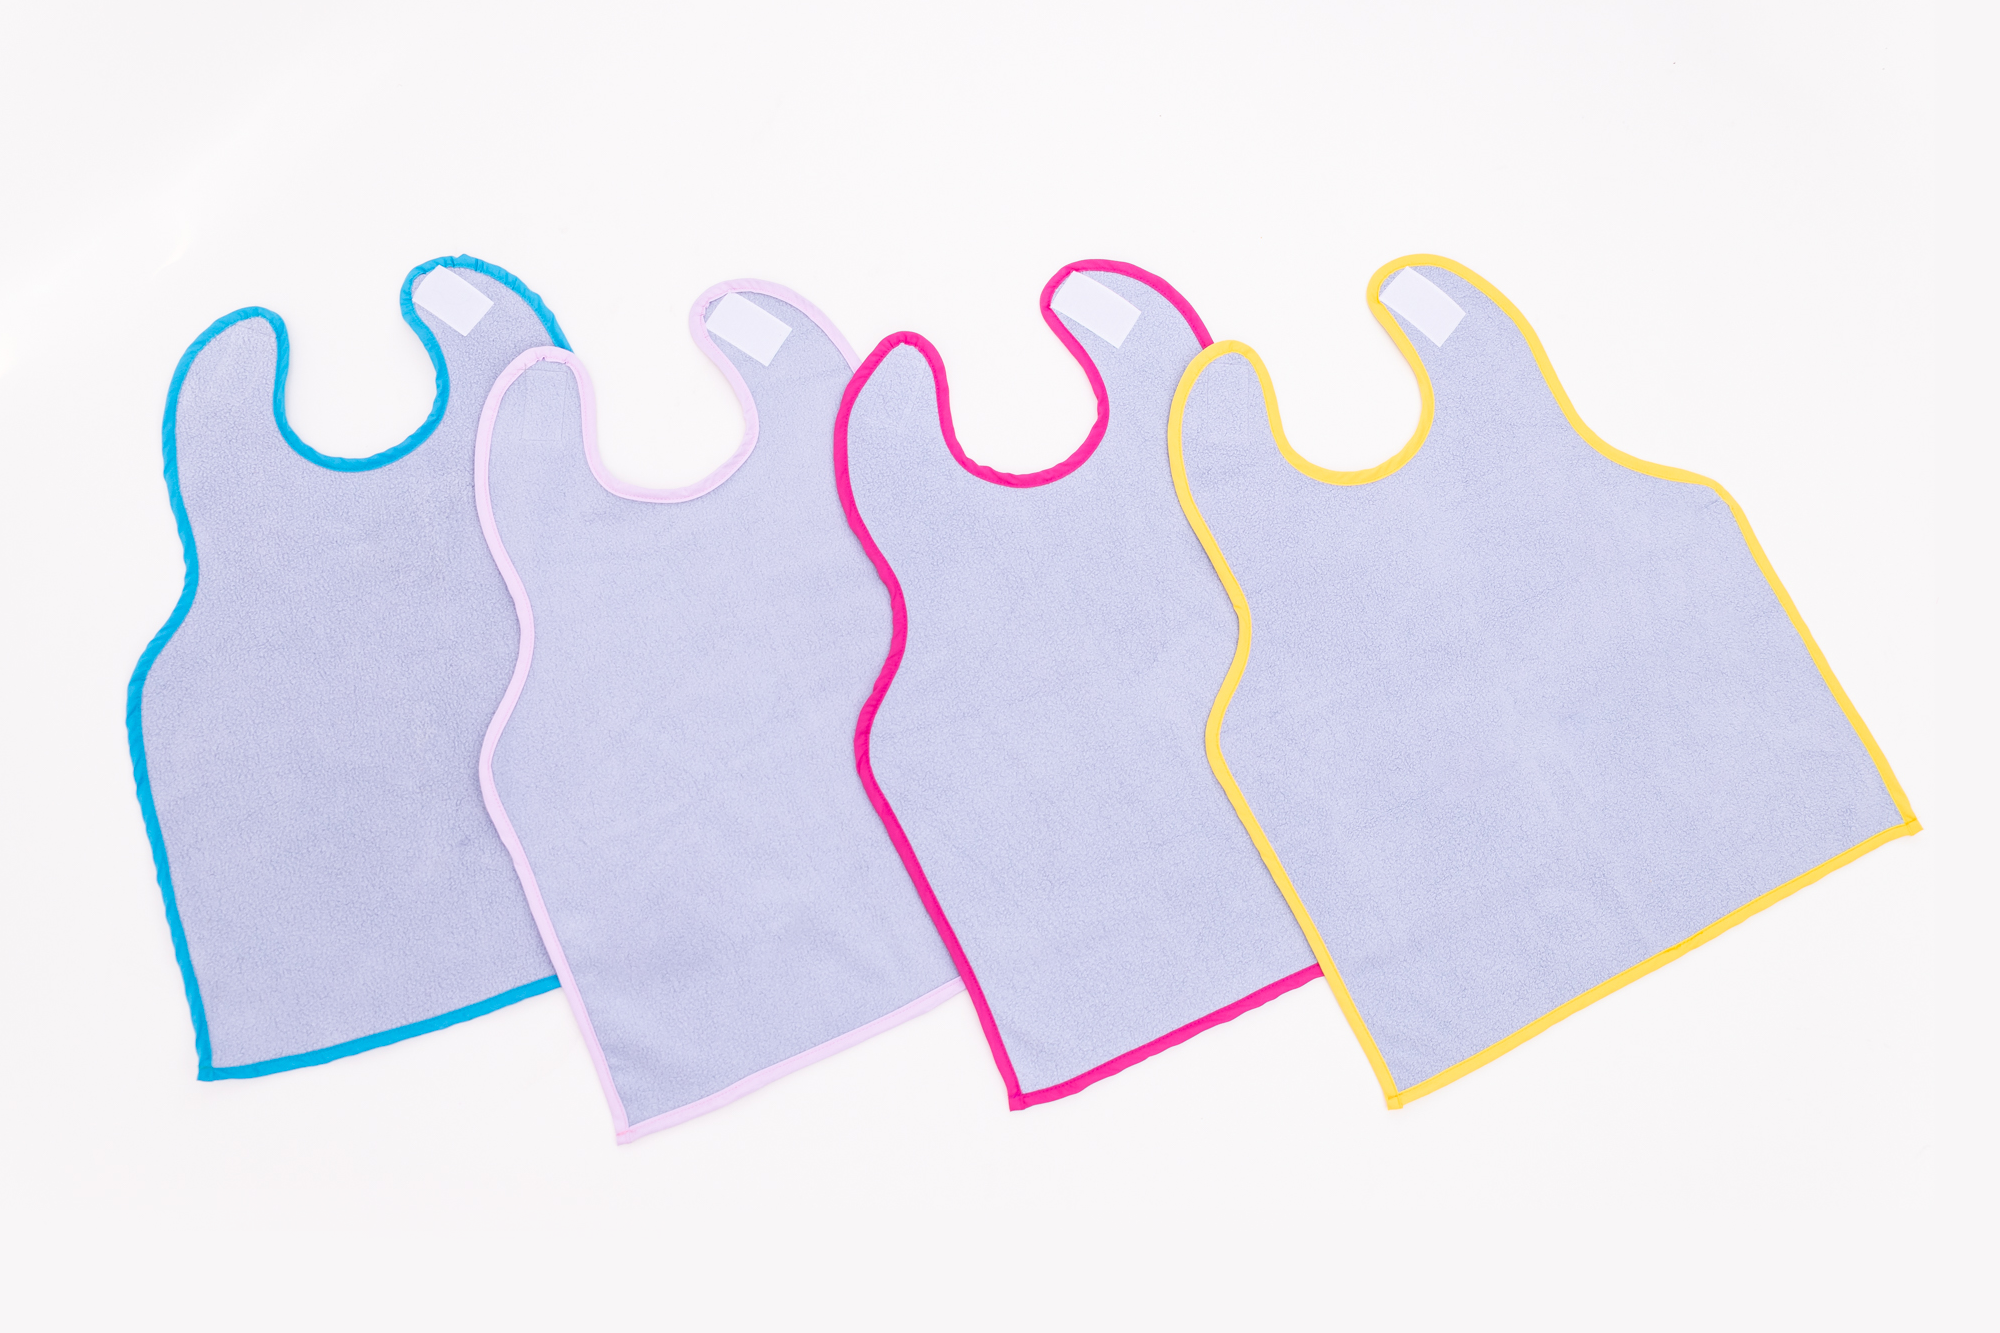 Oversized, ultra absorbent and waterproof bibs for the Car Seat or Feeding. In four colors: Blue, Lavender, Pink, and Yellow.